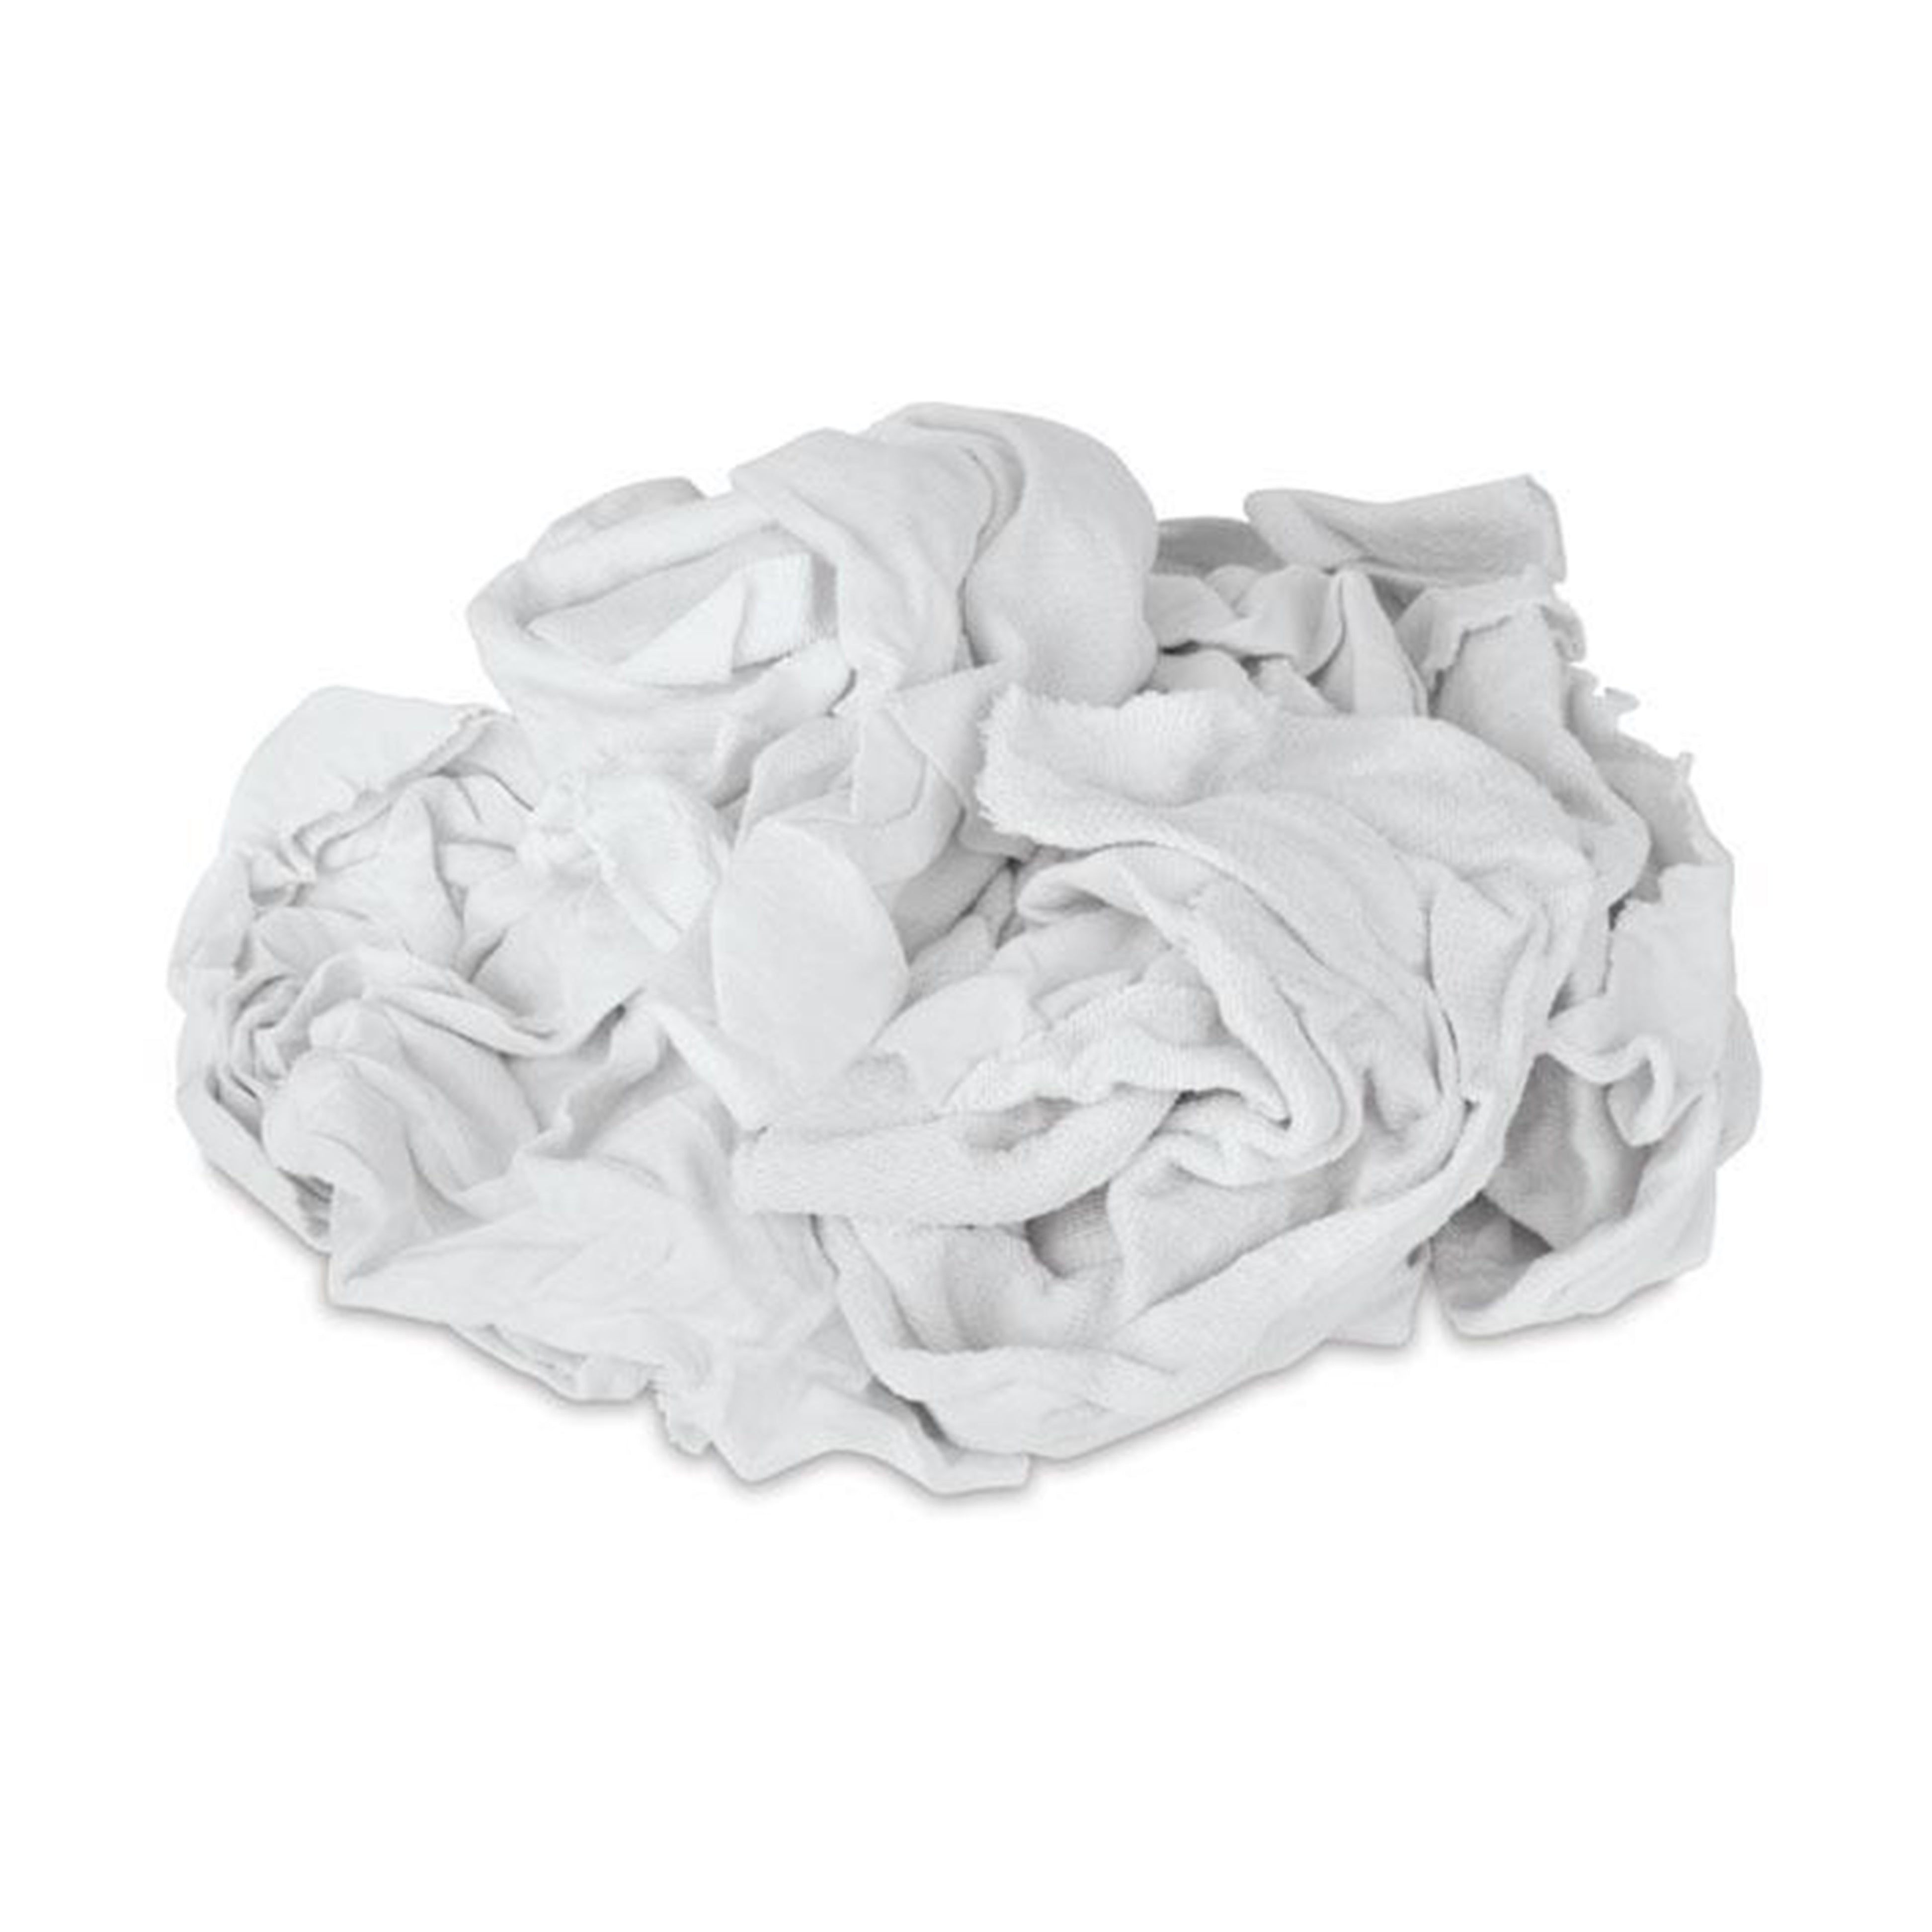  Lint Free White Knit Cotton Rags- 50 Lb. Box - Painters Rags-  Reclaimed T-Shirt Material : Health & Household